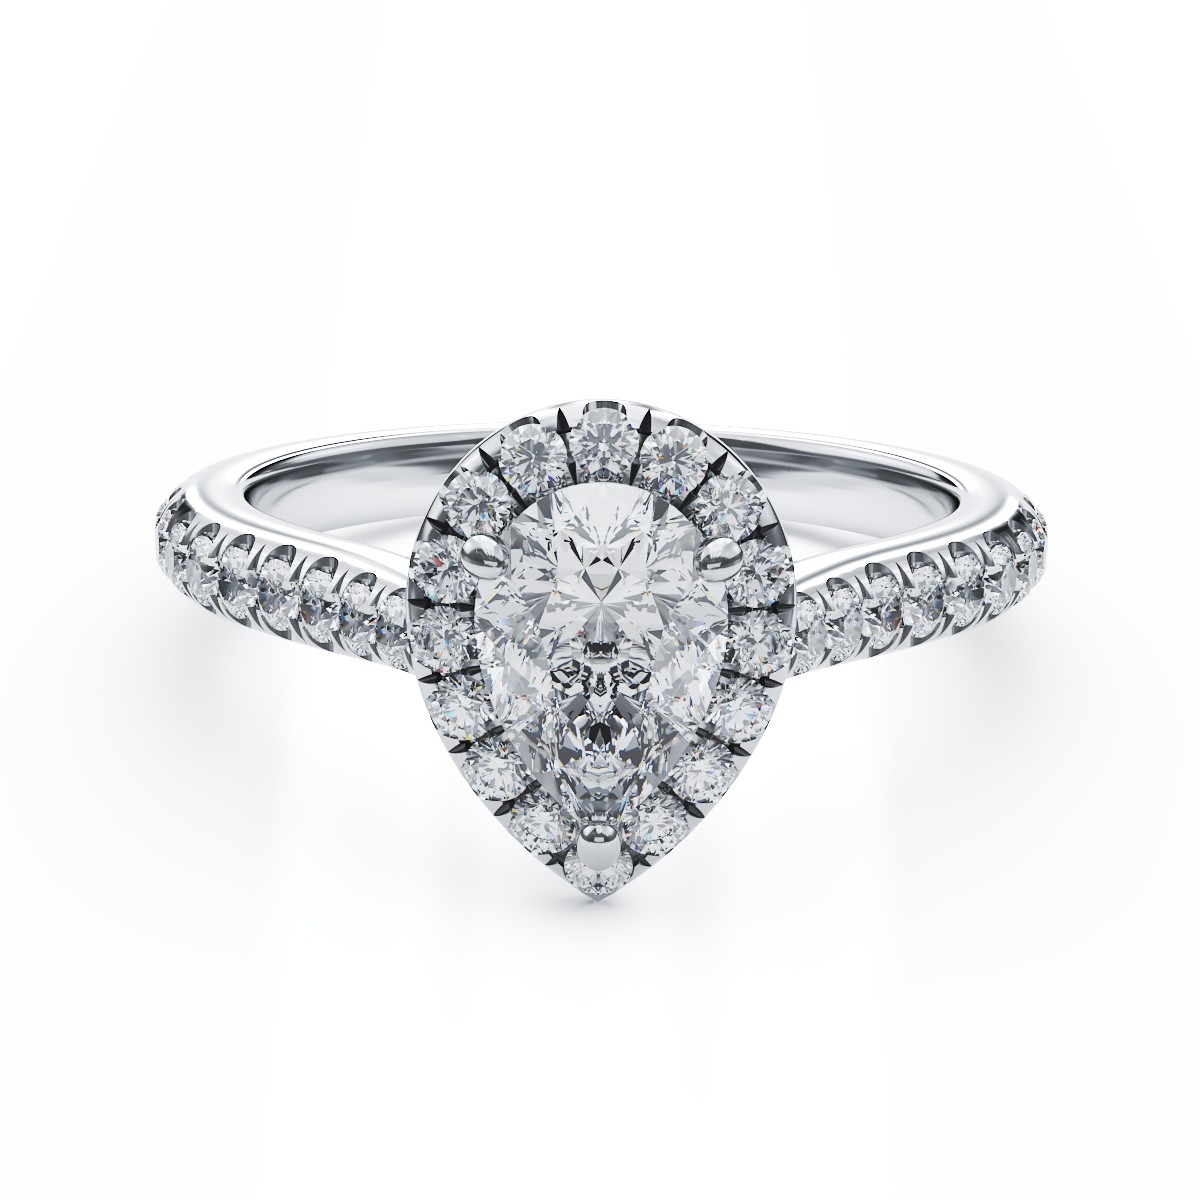 18K white gold engagement ring with 0.8ct diamond and 0.48ct diamond